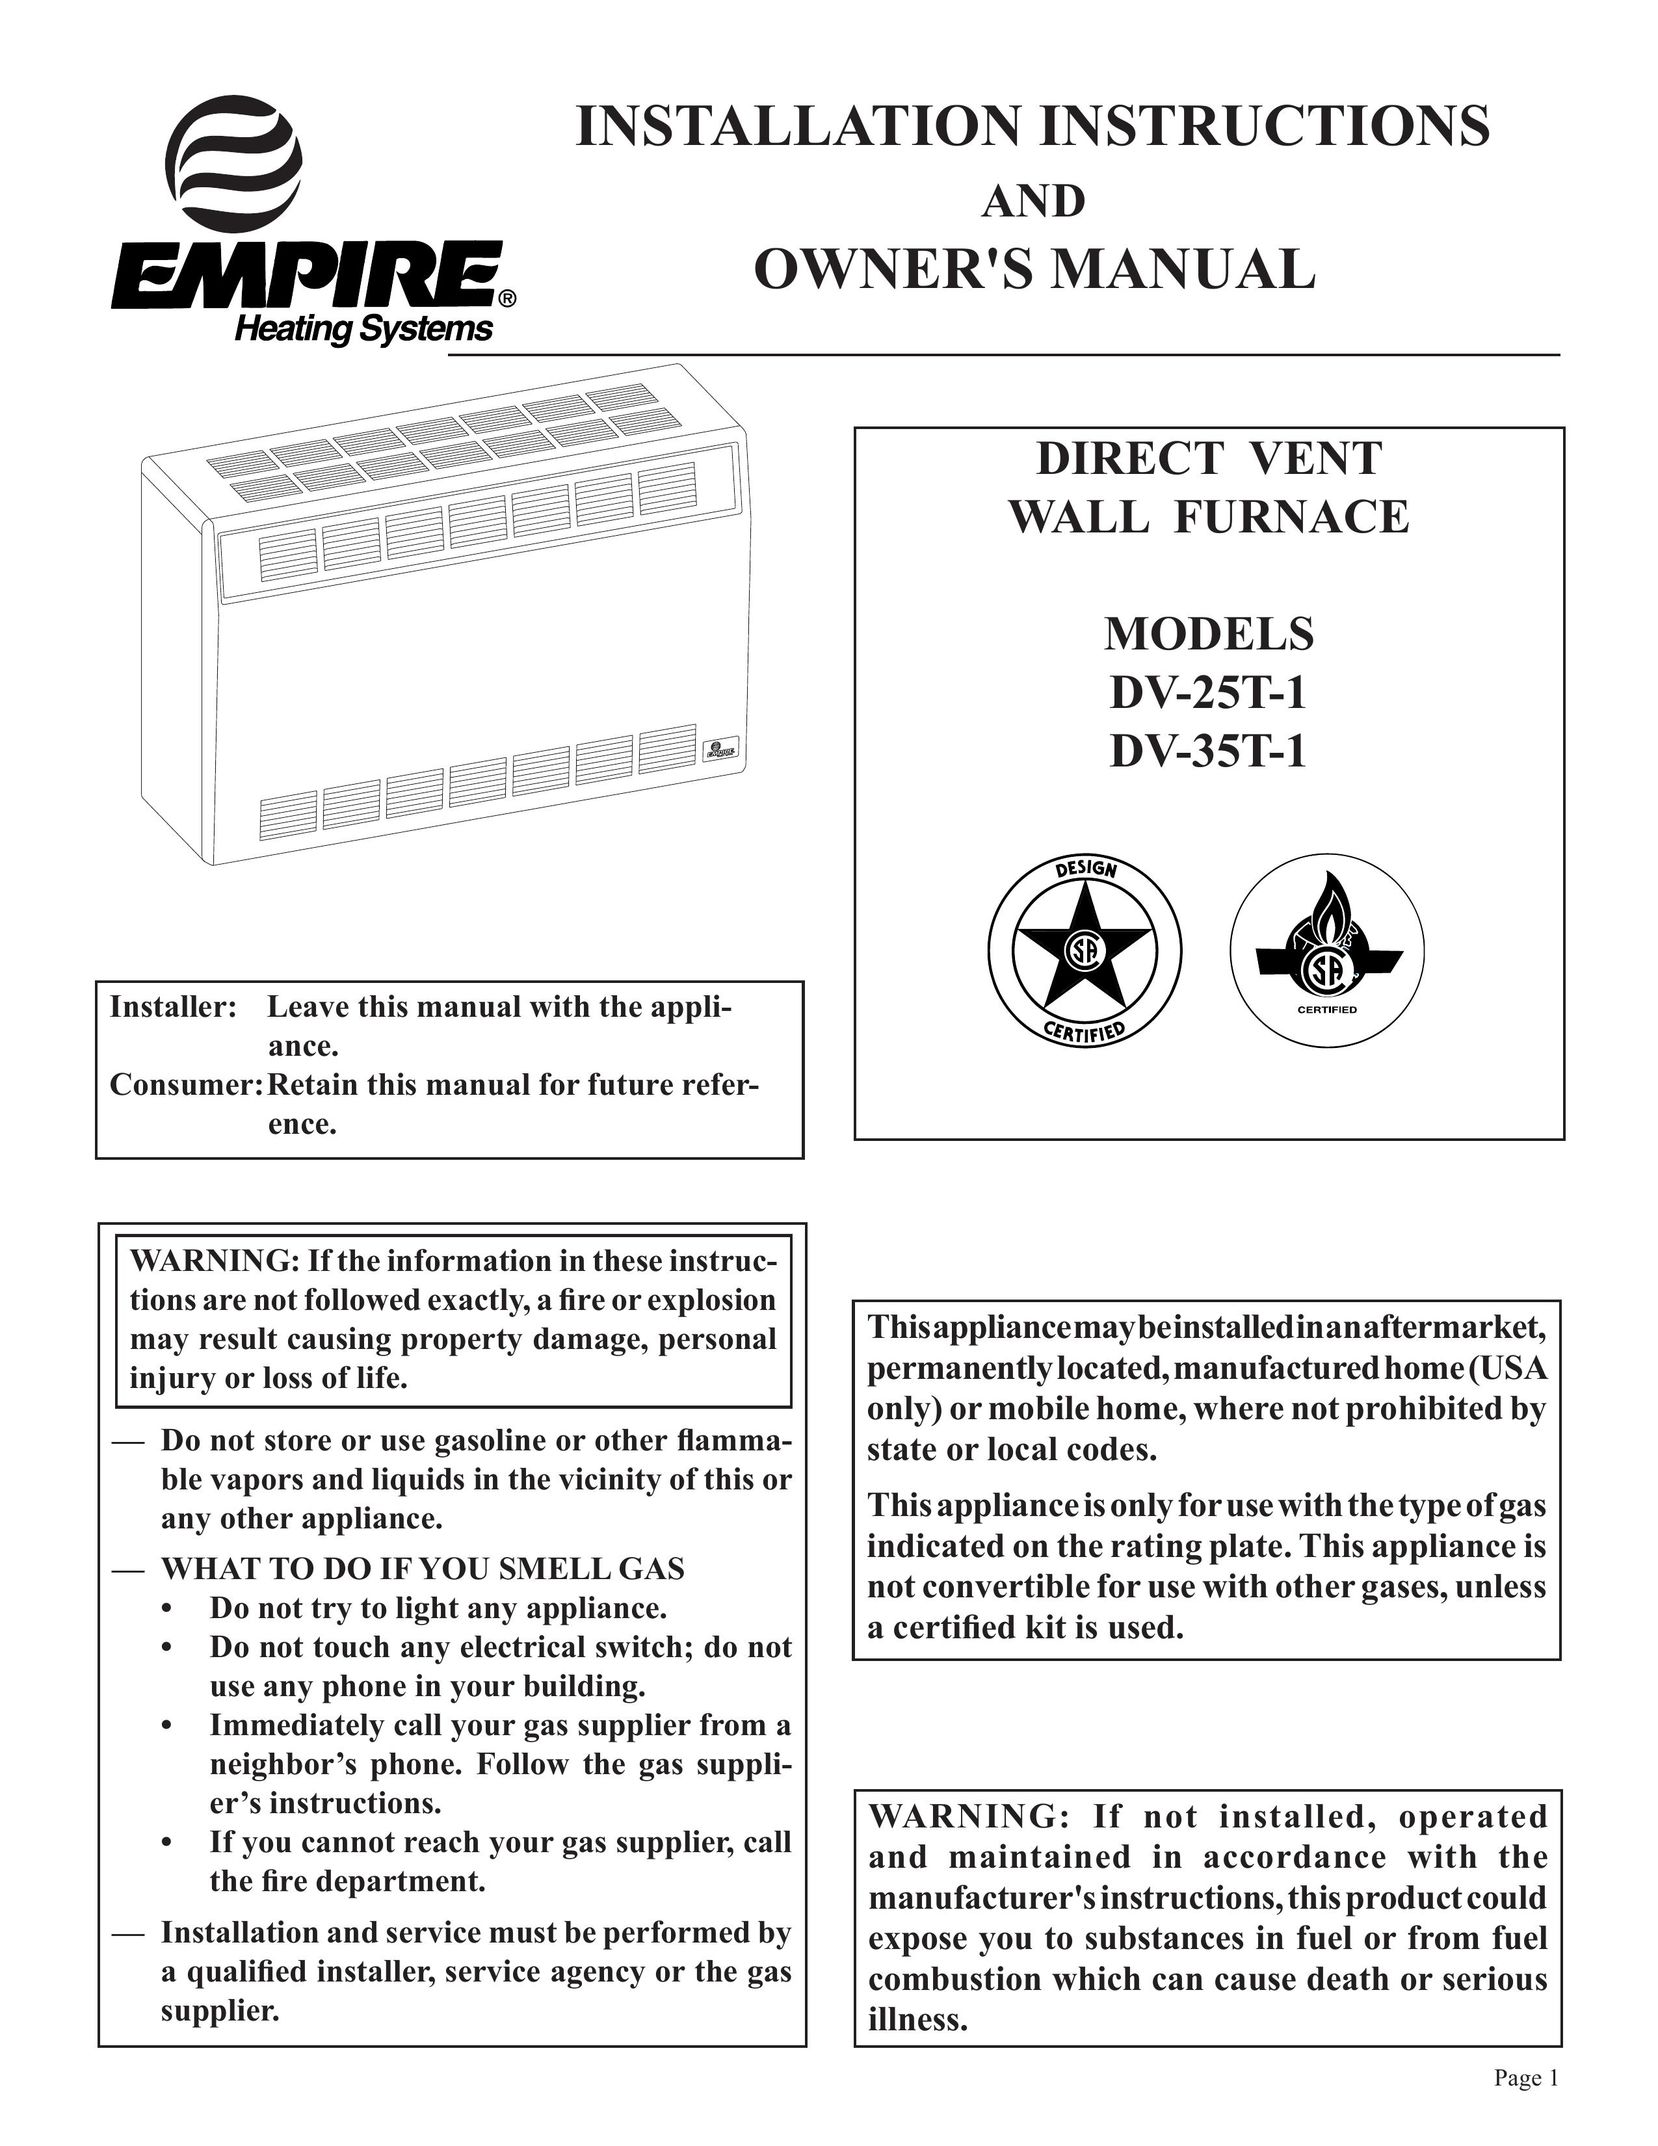 Empire Products DV-35T-1 Furnace User Manual